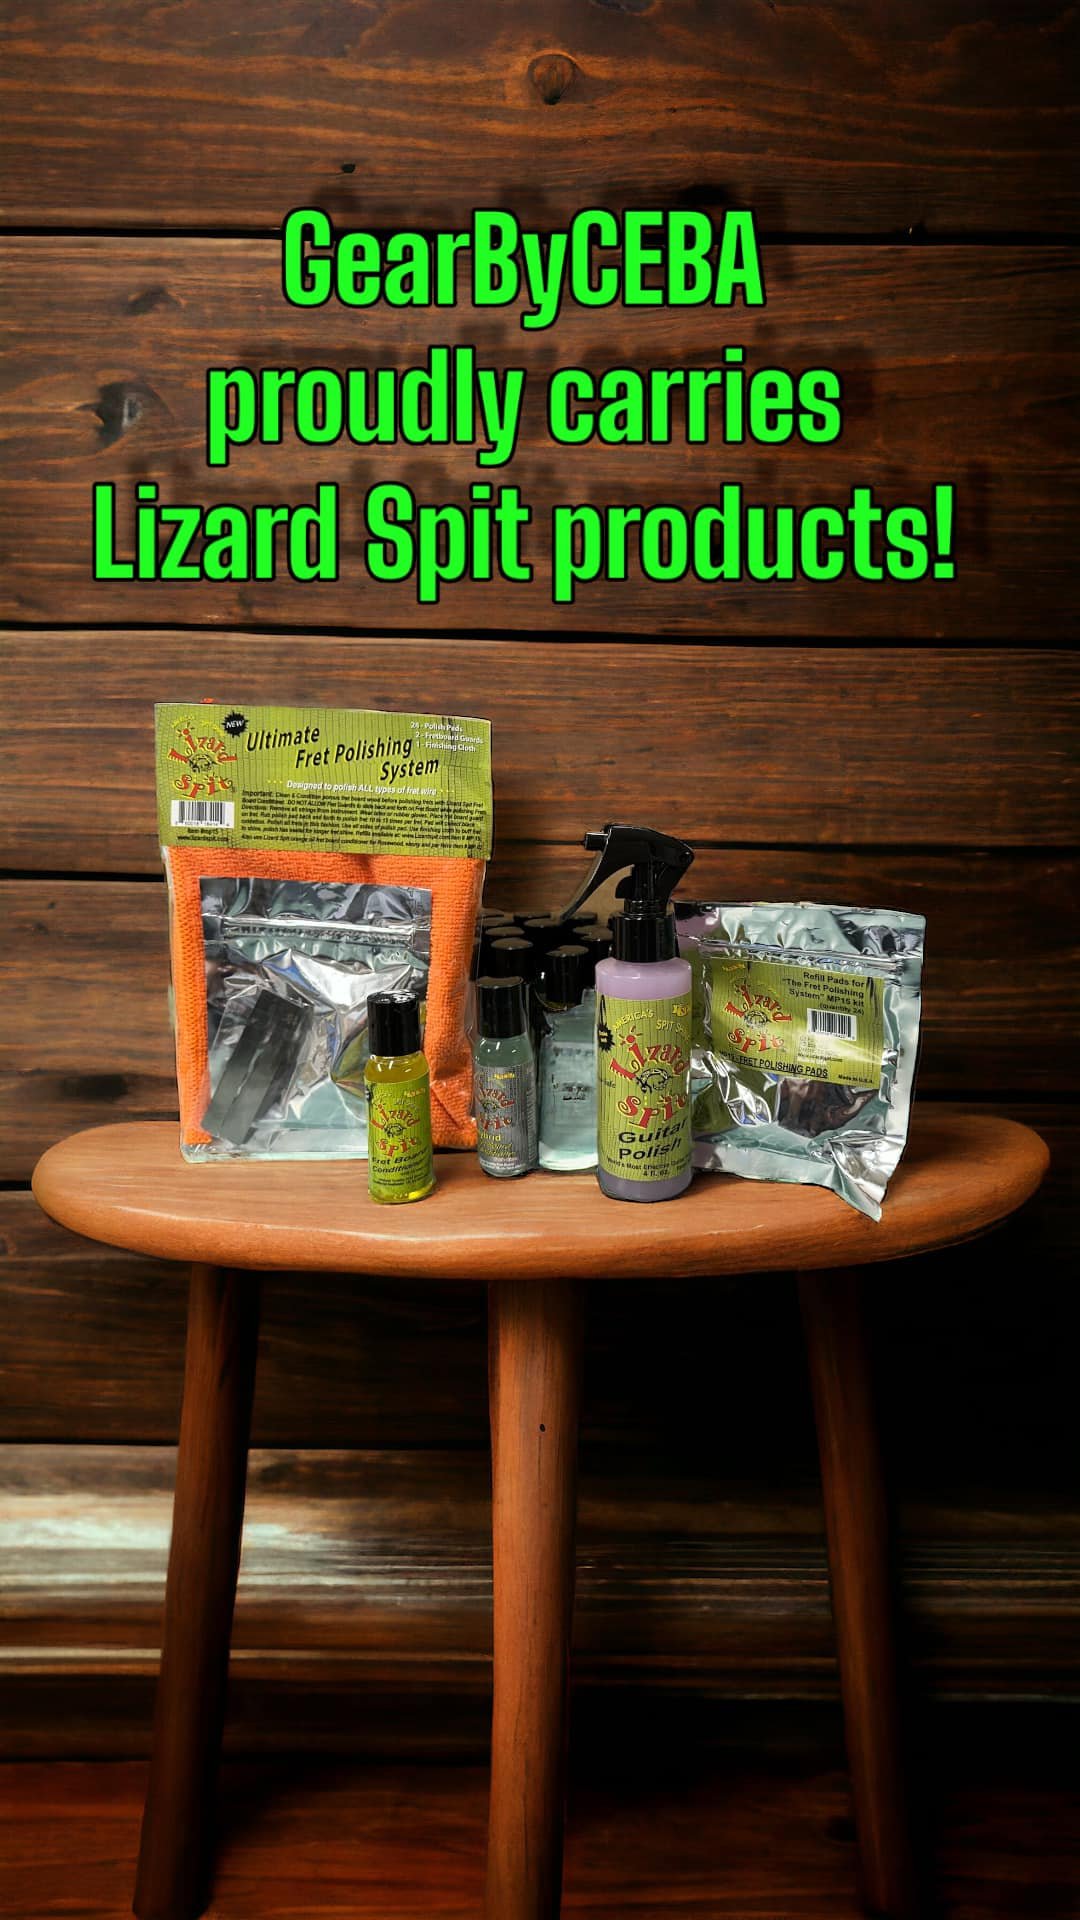 We have and are proud suppliers of Lizard Spit Music Care Products - Eco Safe products 

https://www.gearbyceba.com/accesories-usa